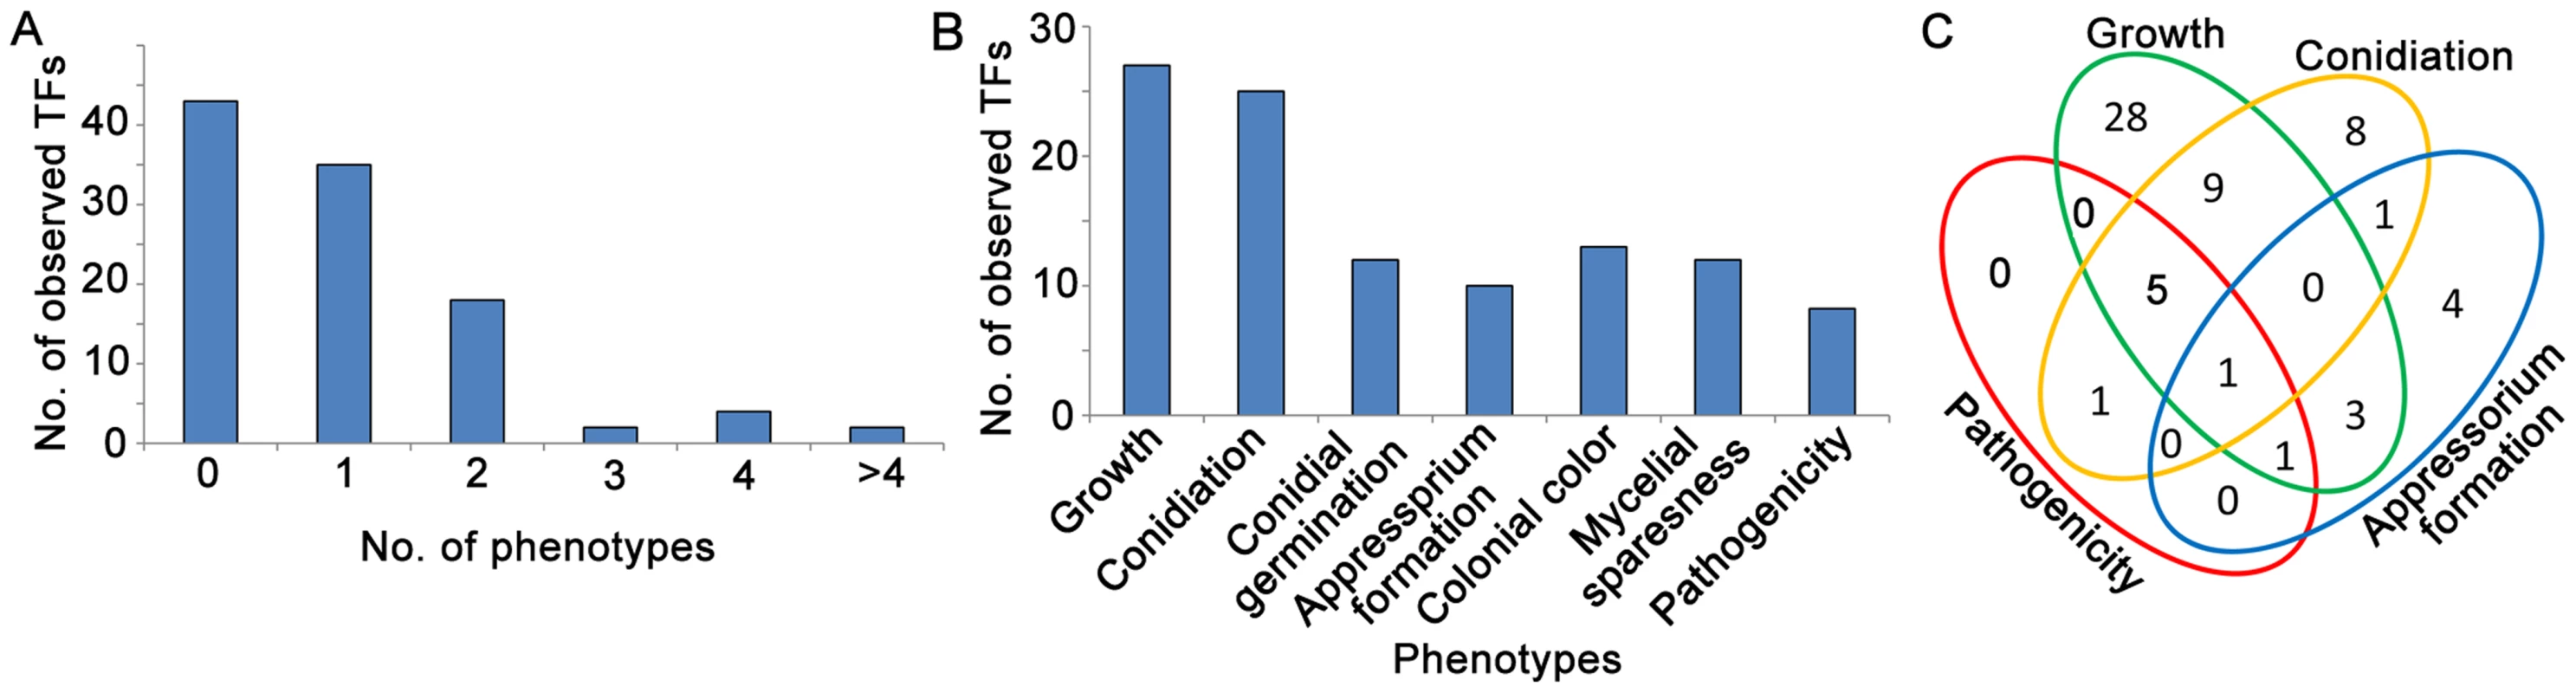 Analysis of Zn<sub>2</sub>Cys<sub>6</sub> transcription factor mutant phenotypes in fungal development stages.